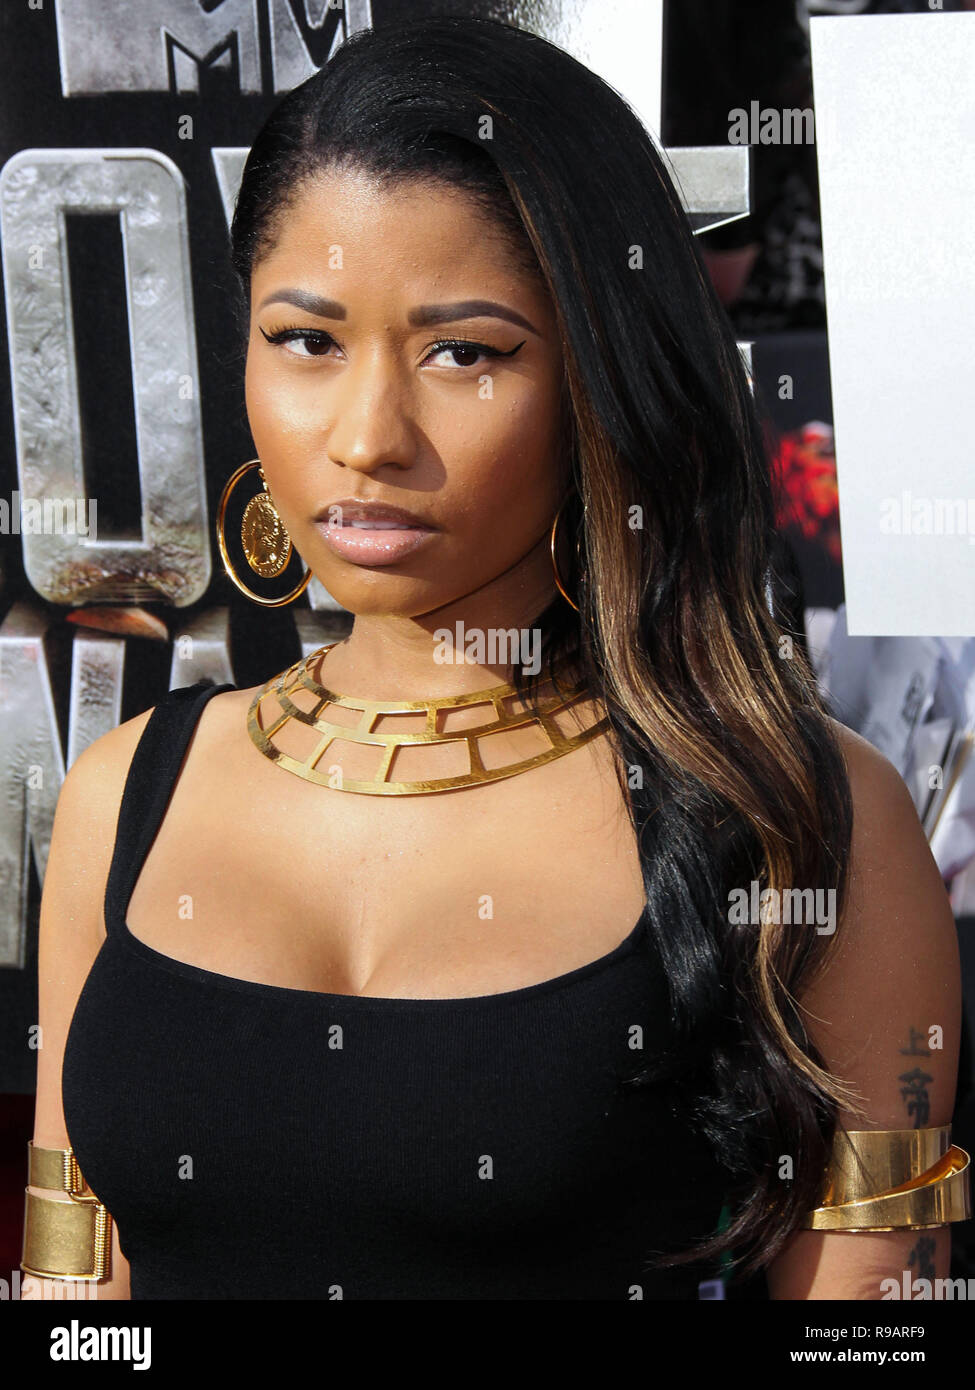 (FILE) Nicki Minaj Renamed Her Tour To 'The Nicki WRLD Tour' And Replaced Future With Juice WRLD. Nicki Minaj has finally revealed details surrounding her upcoming world tour 'The Nicki WRLD Tour'. Nicki has swapped out rap superstar Future with Chicago rap star Juice WRLD and she has cleverly renamed the outing from 'NickiHndrxx' to 'The Nicki WRLD Tour'. LOS ANGELES, CA, USA - APRIL 13: Rapper Nicki Minaj wearing a floor-length, black gown by Alexander McQueen, with gold cuffs, a large gold necklace and a gorgeous ring by John Hardy arrives at the 2014 MTV Movie Awards held at Nokia Theatre  Stock Photo